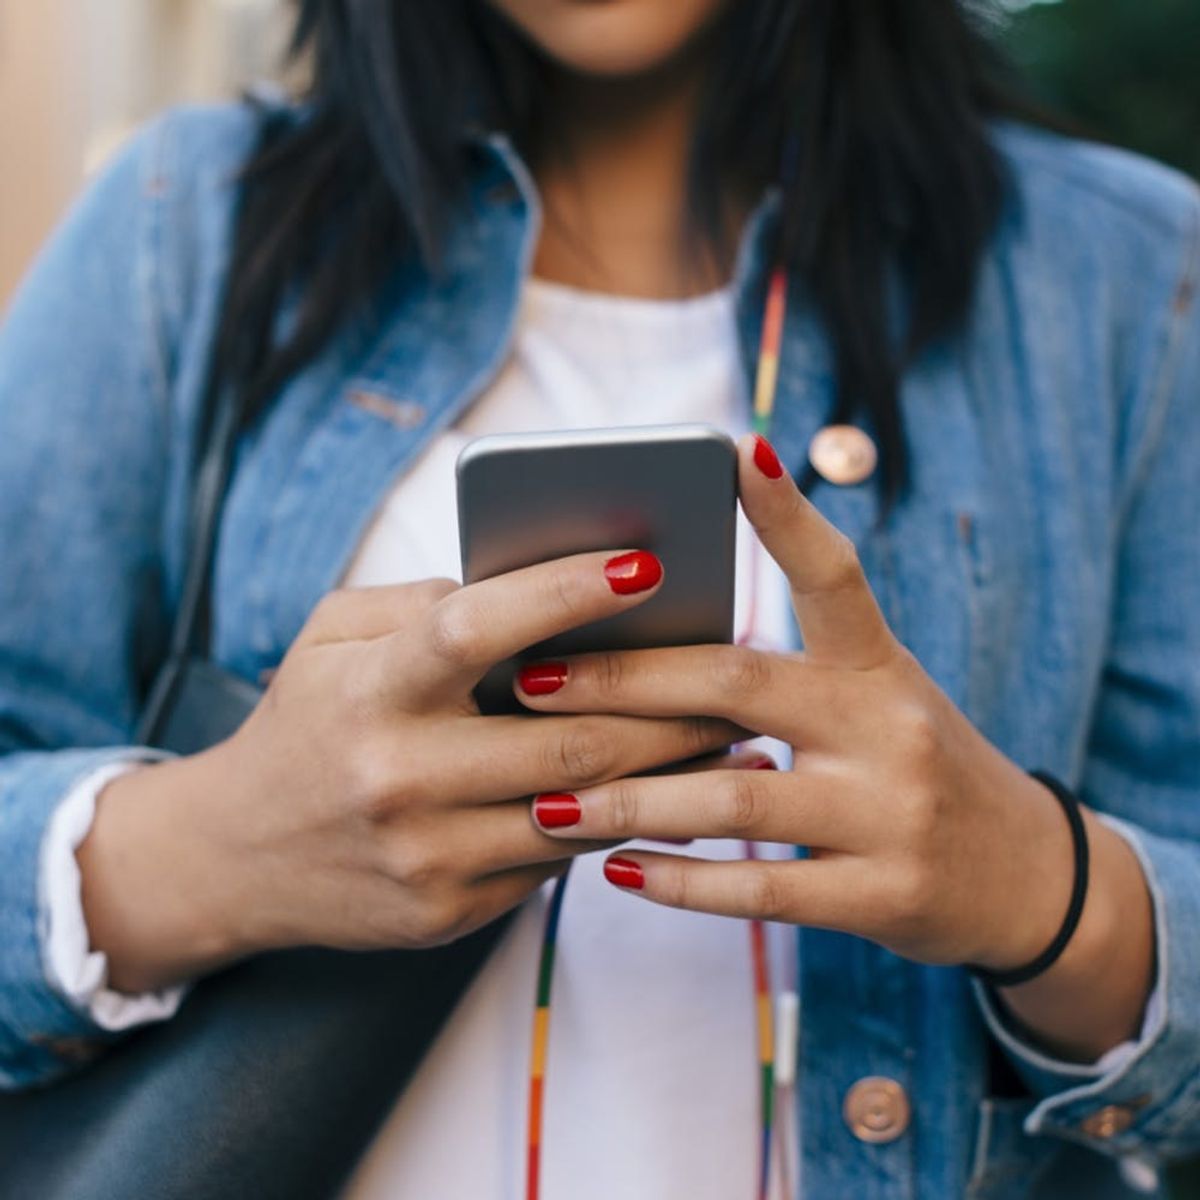 6 Tips for Using Your Phone More Mindfully